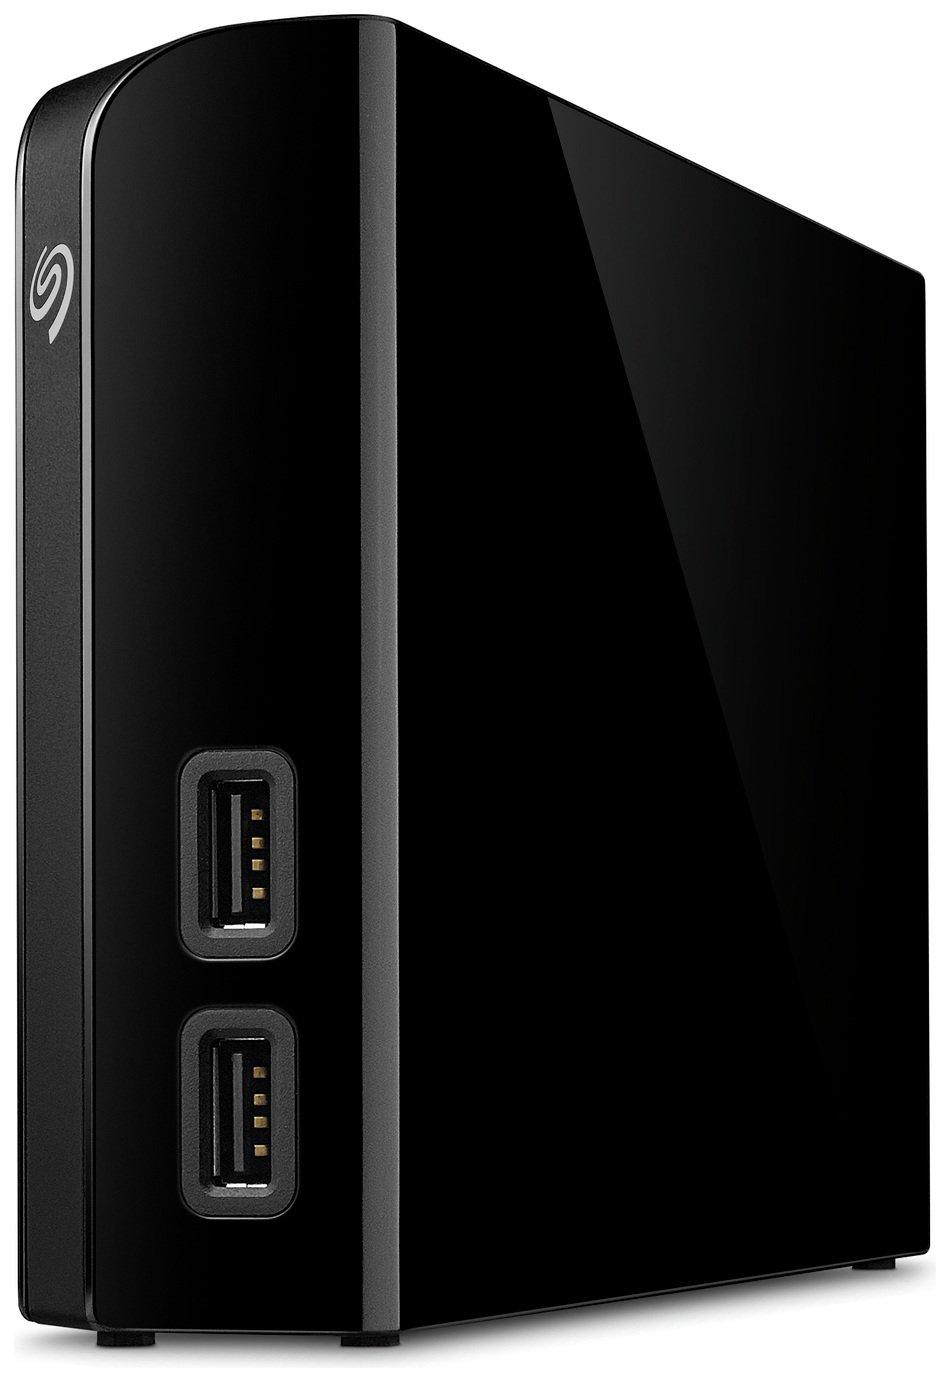 Seagate Back Up Plus 6TB Desktop Hard Drive with USB Hub Review